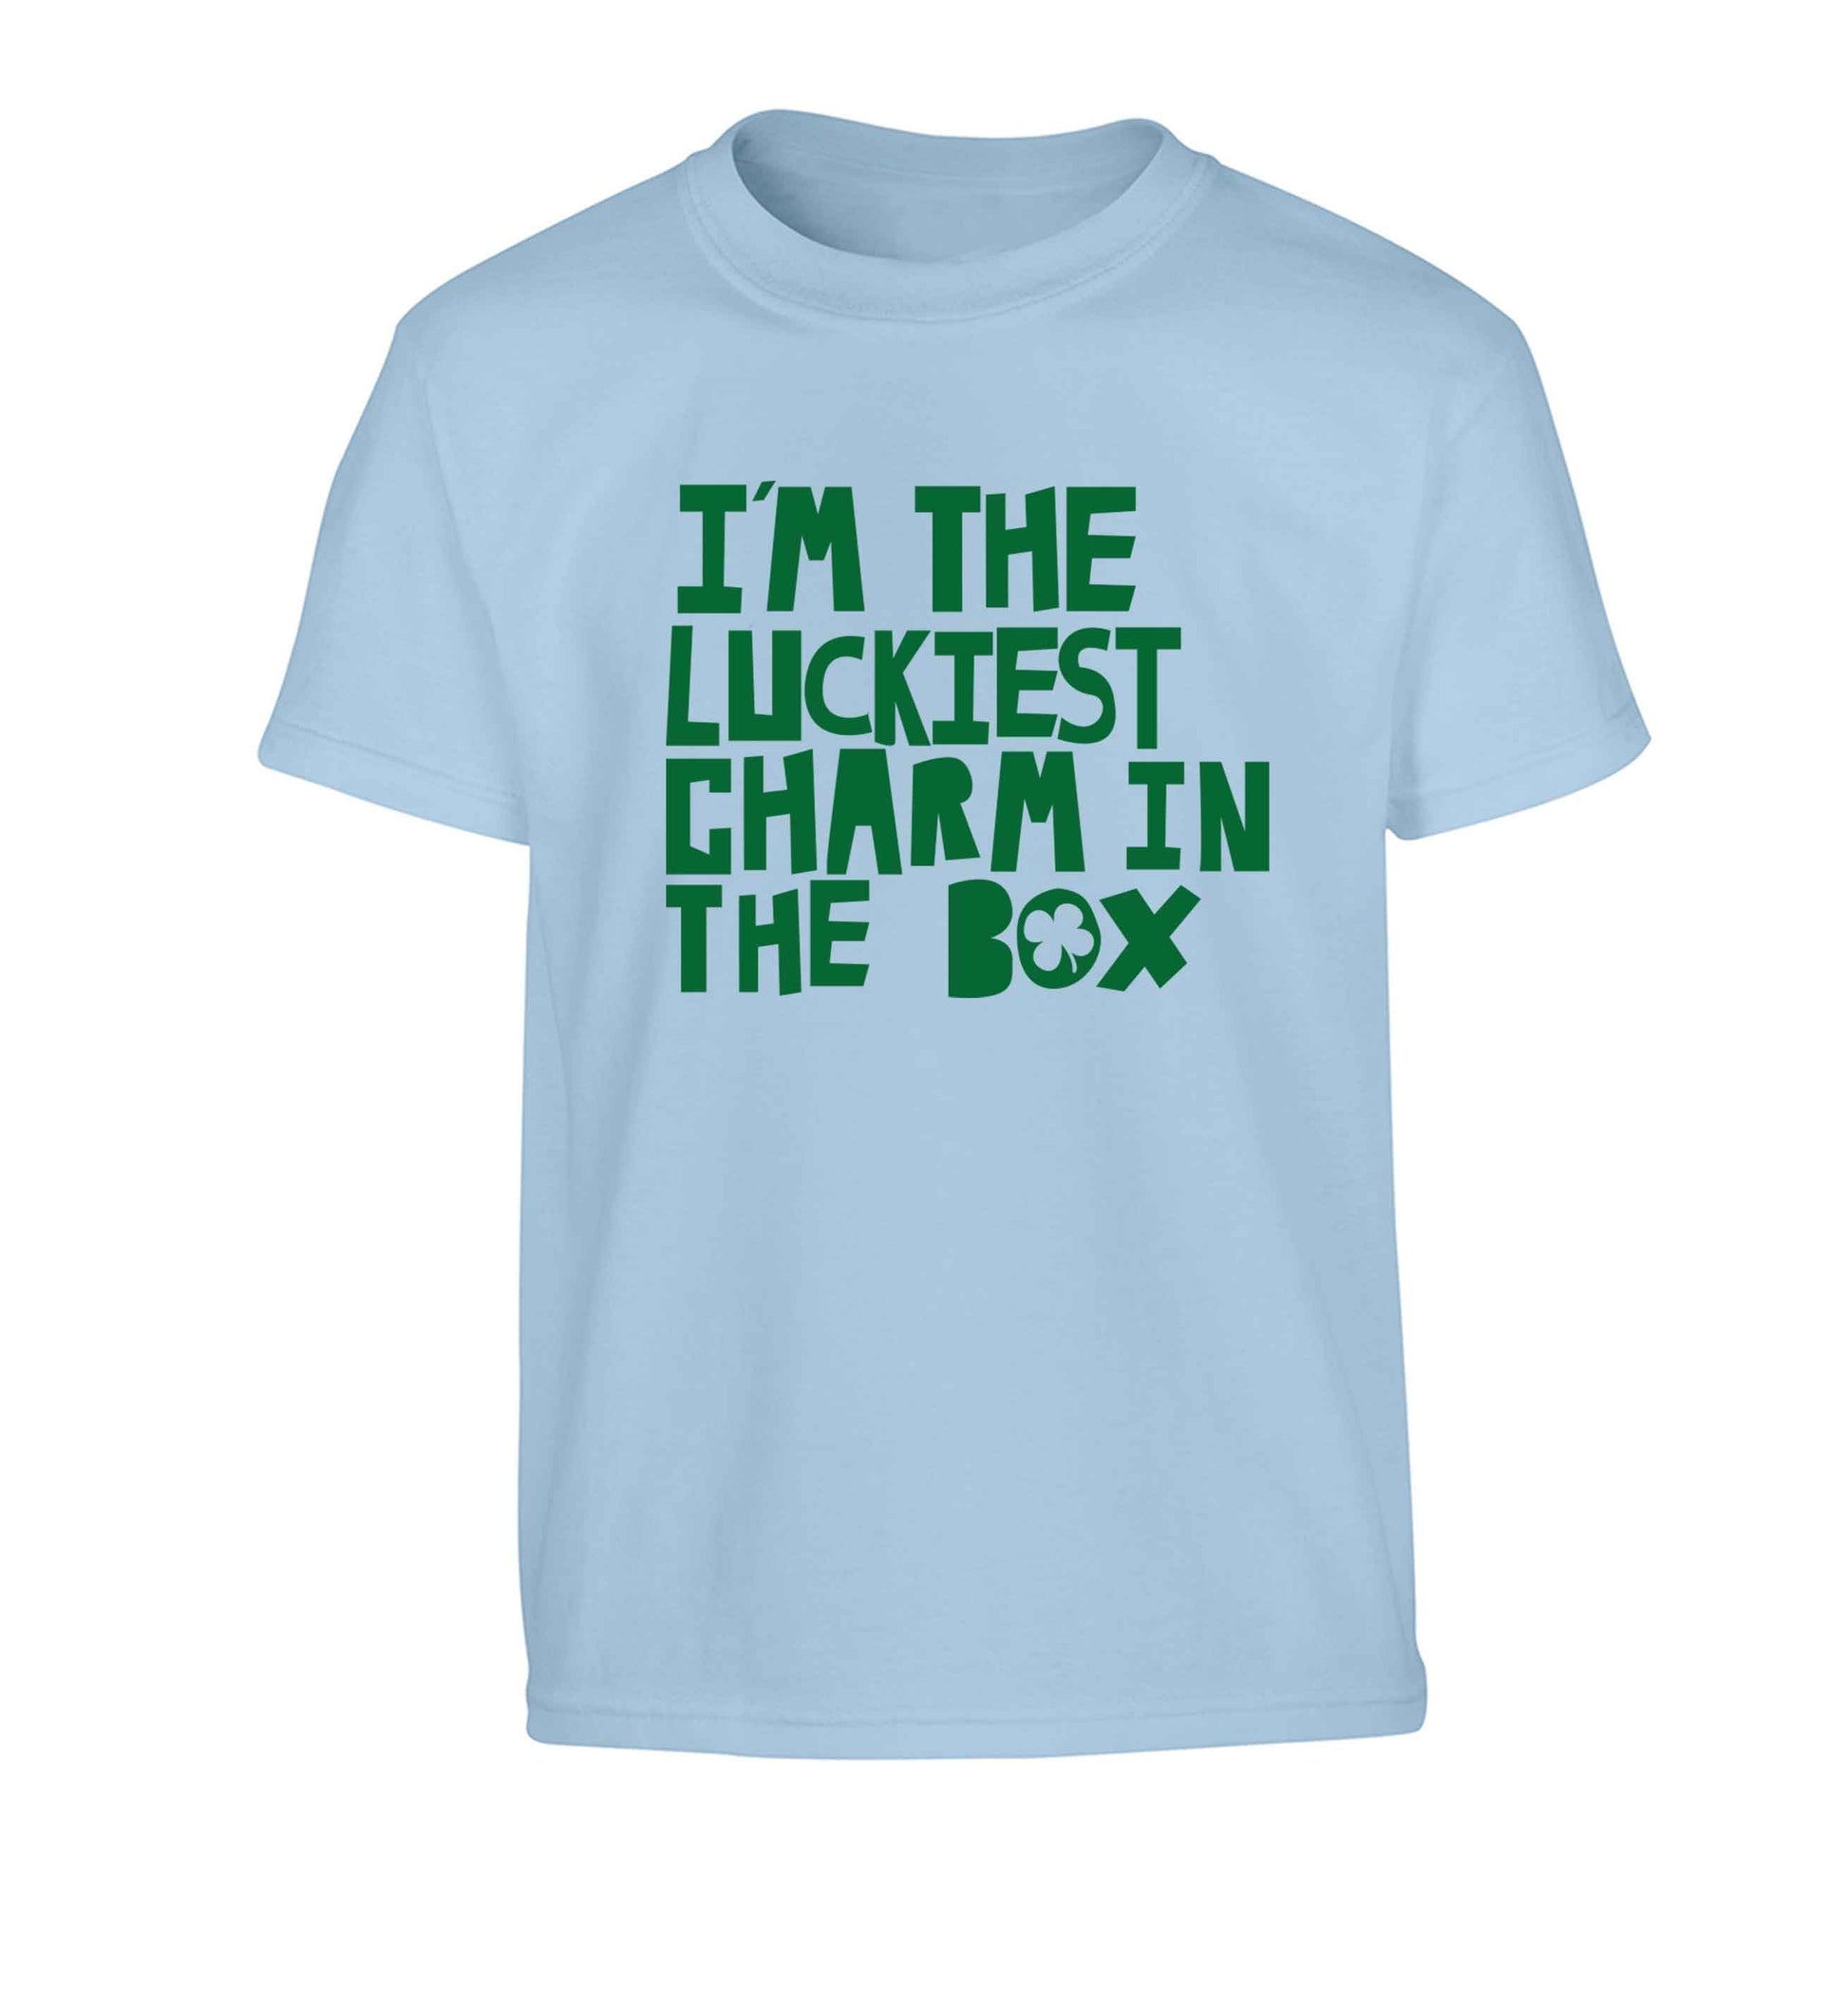 I'm the luckiest charm in the box Children's light blue Tshirt 12-13 Years